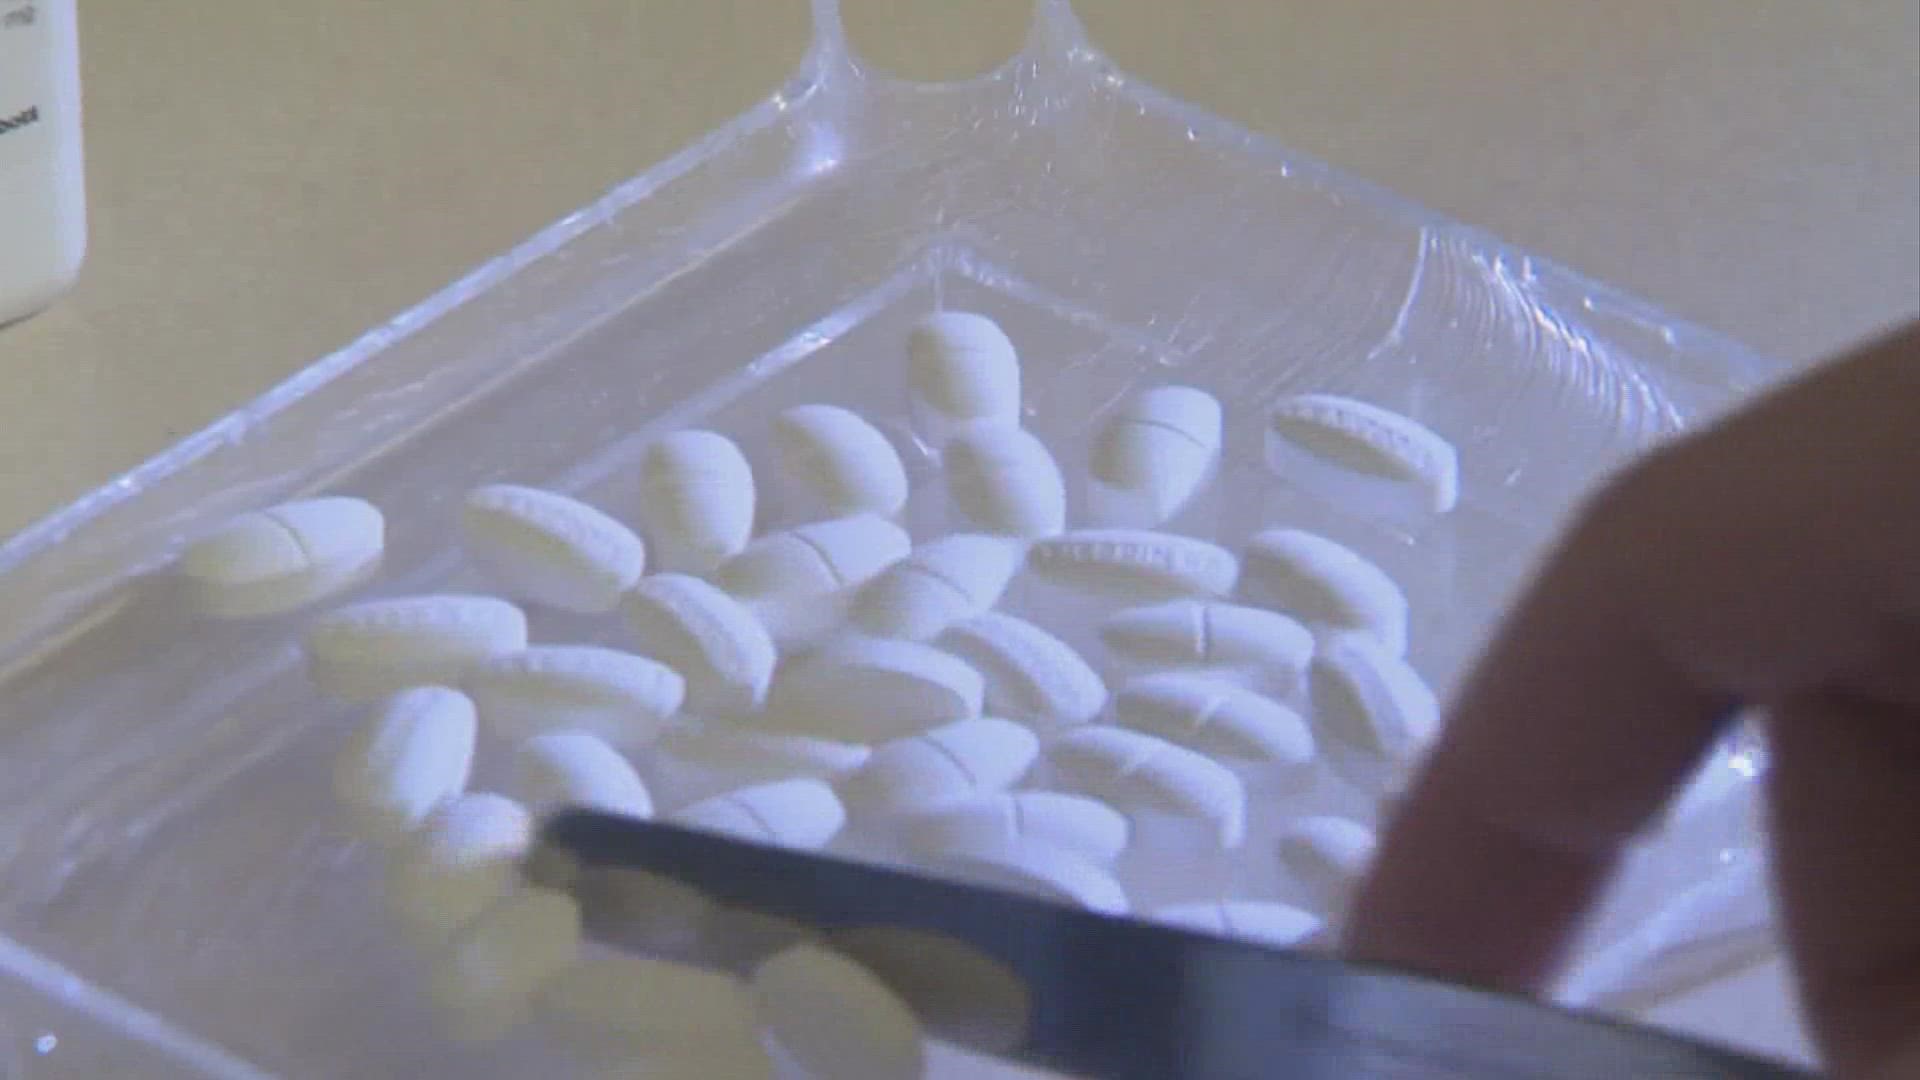 The FDA released a list of more than 100 drugs that could soon see a shortage of supply, including Adderall, insulin and Narcan. Two experts say not to panic.